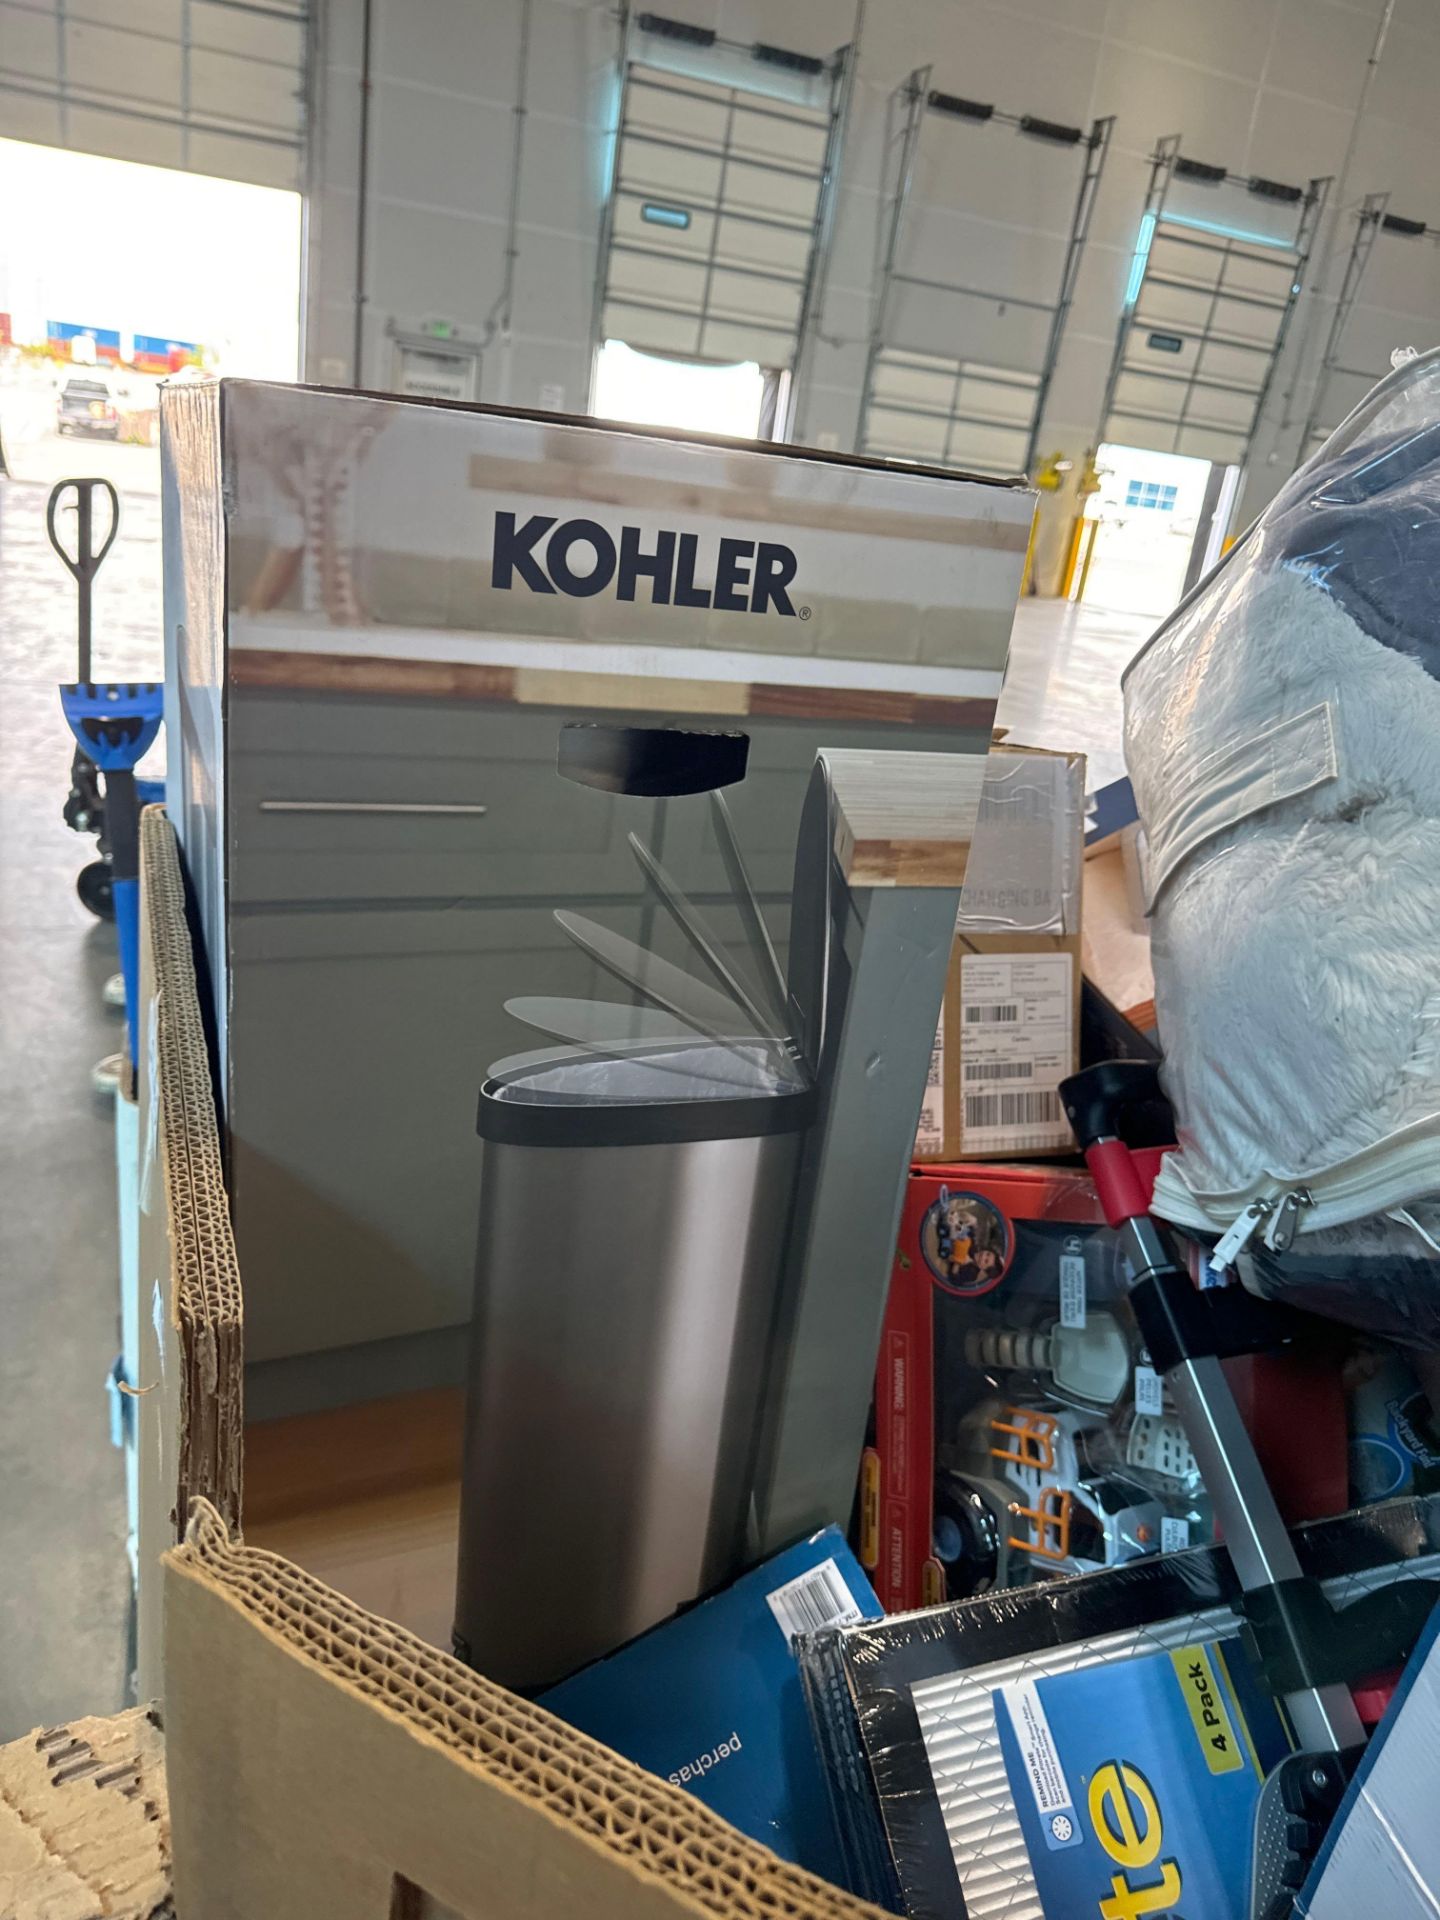 Kohler garbage can, bedding, pillow, cart, toys, rug, hangers and more - Image 3 of 8